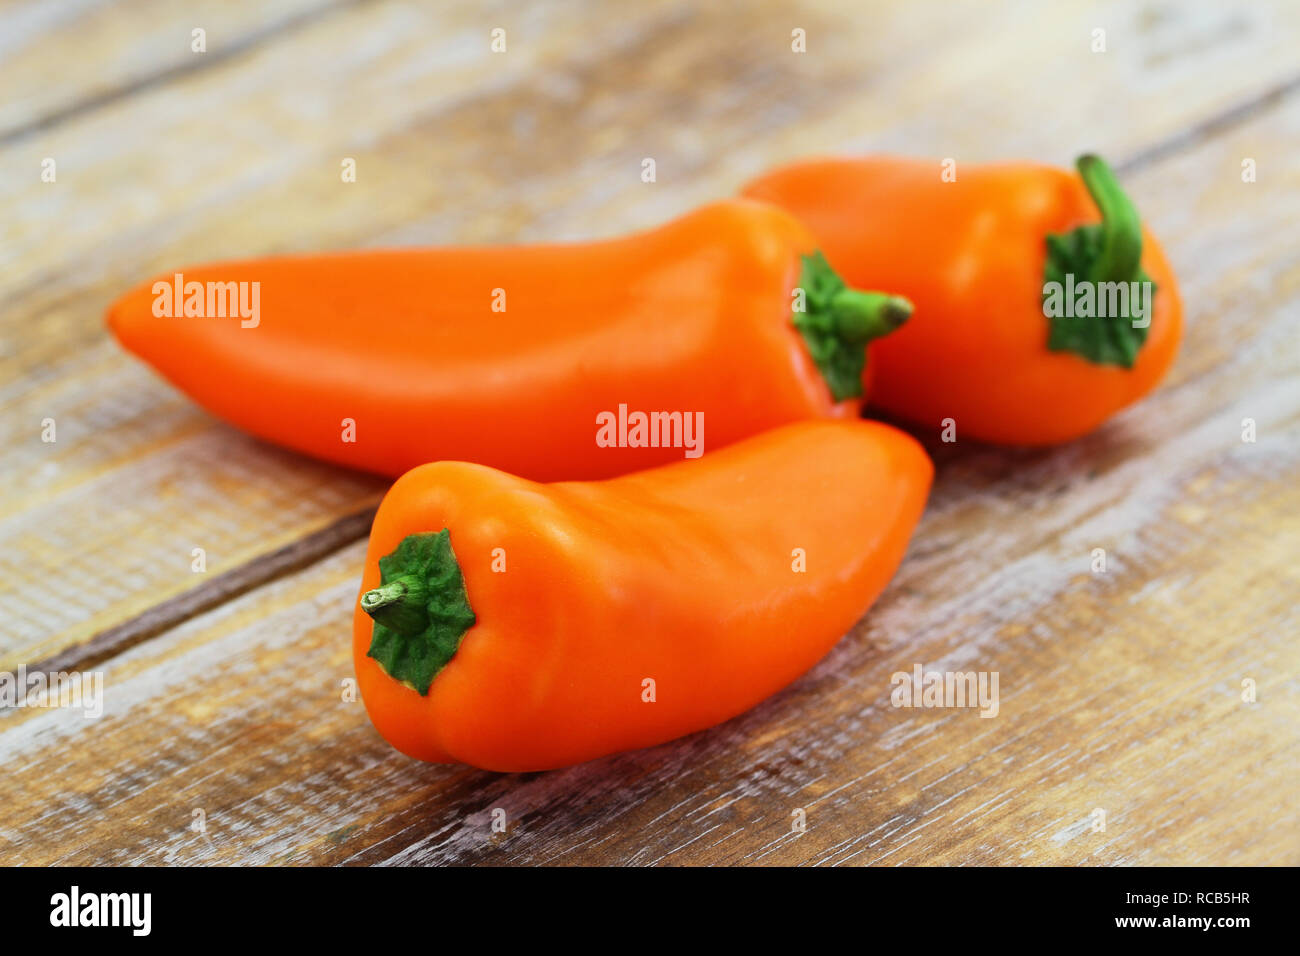 Crunchy snack paprika on wooden surface, closeup Stock Photo